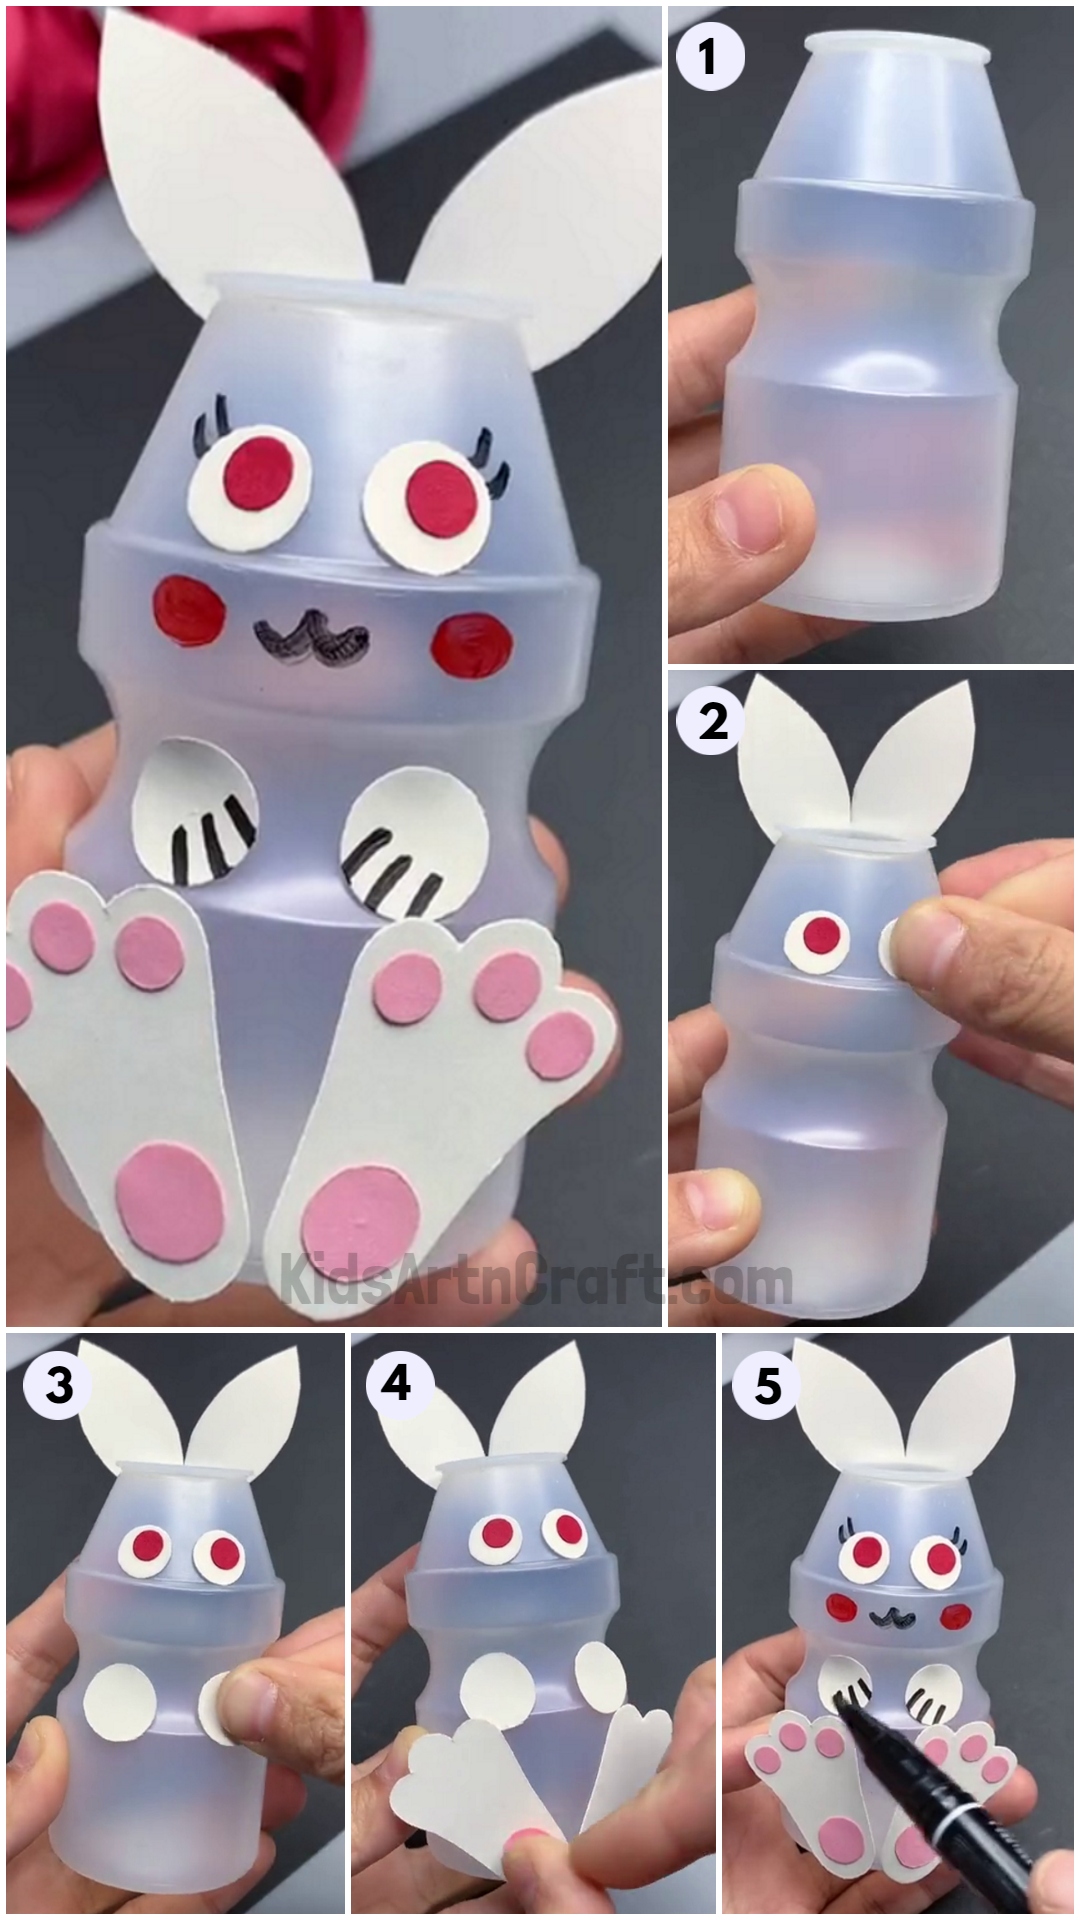  Easy Bunny Craft From Recycled Plastic Bottle